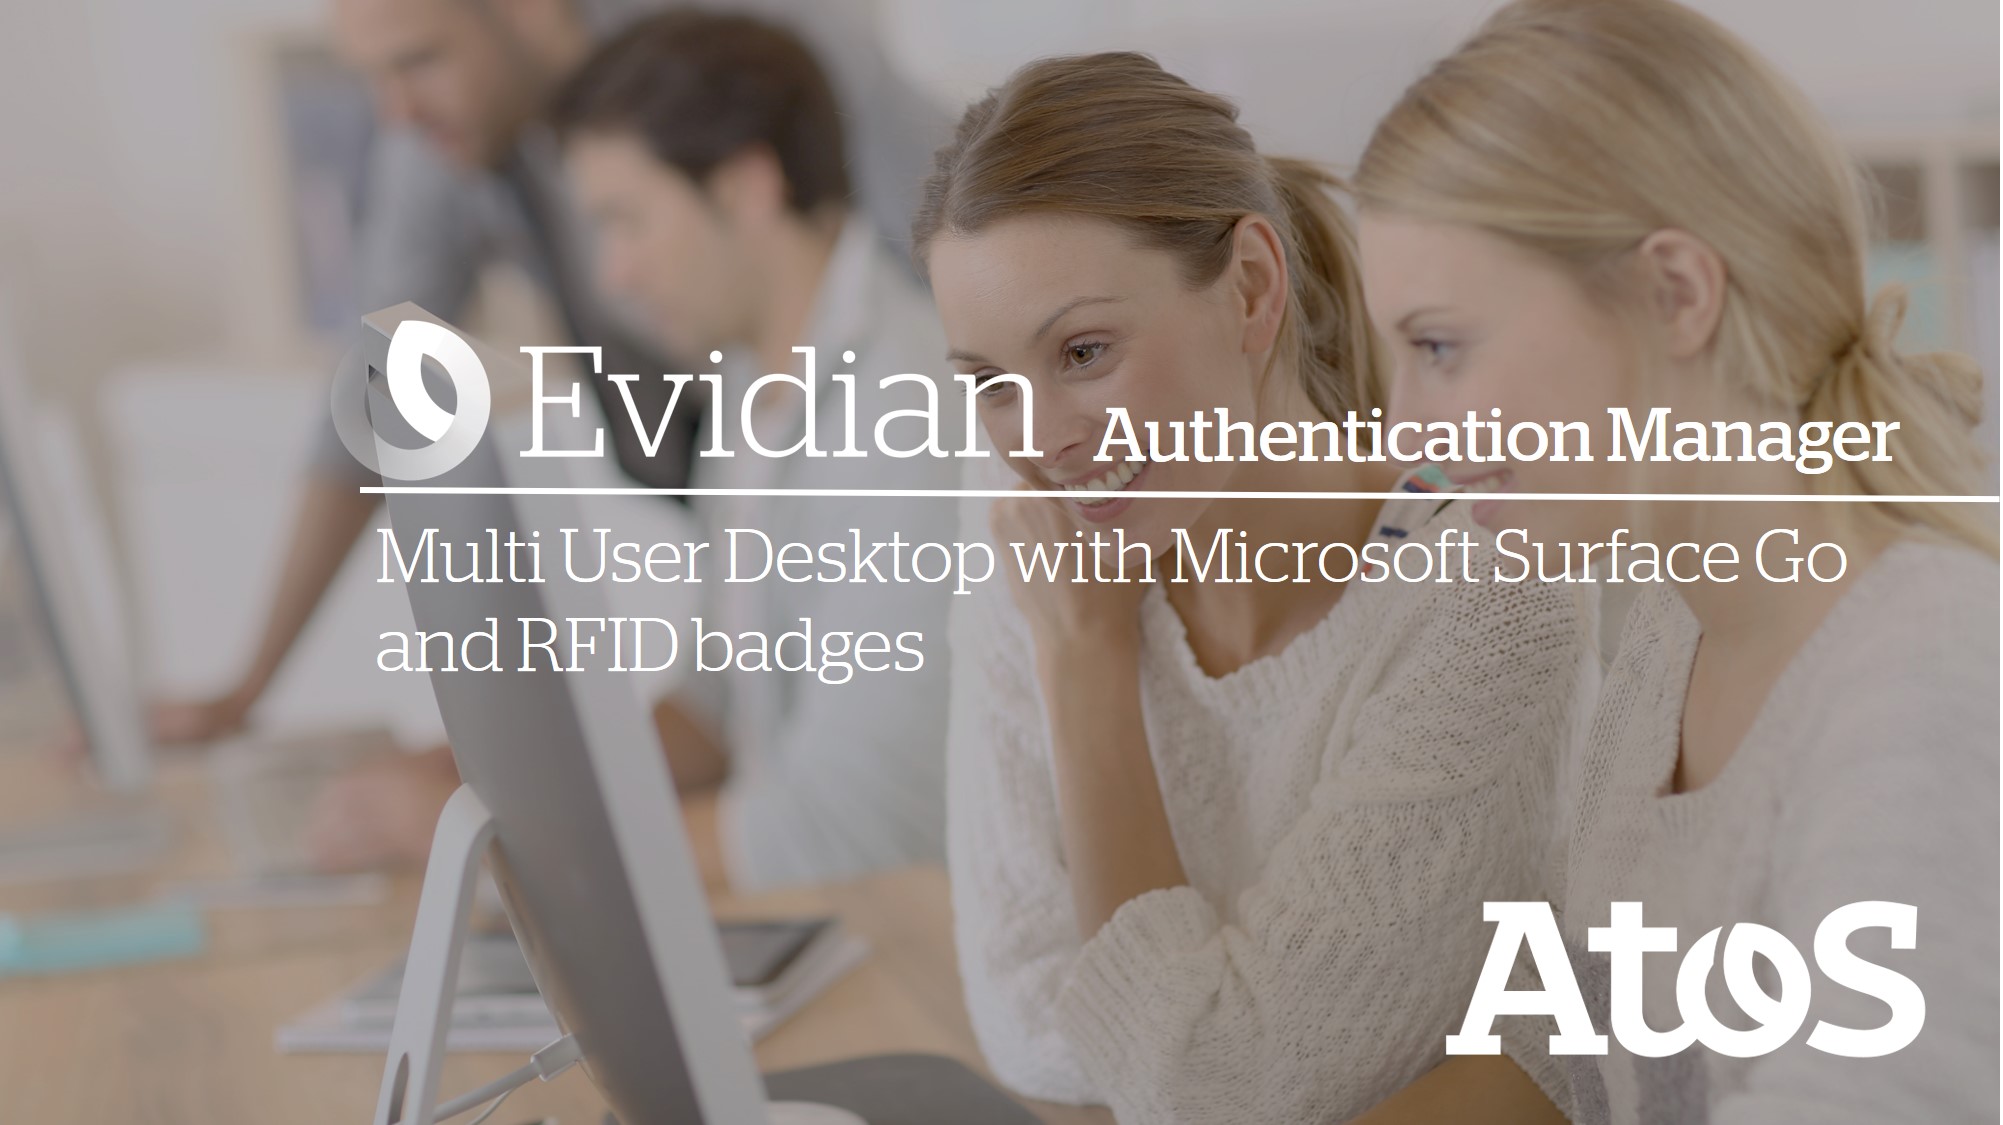 Multi-User Desktop - Secure an autologon shared account with the RFID badge of a doctor and a nurse